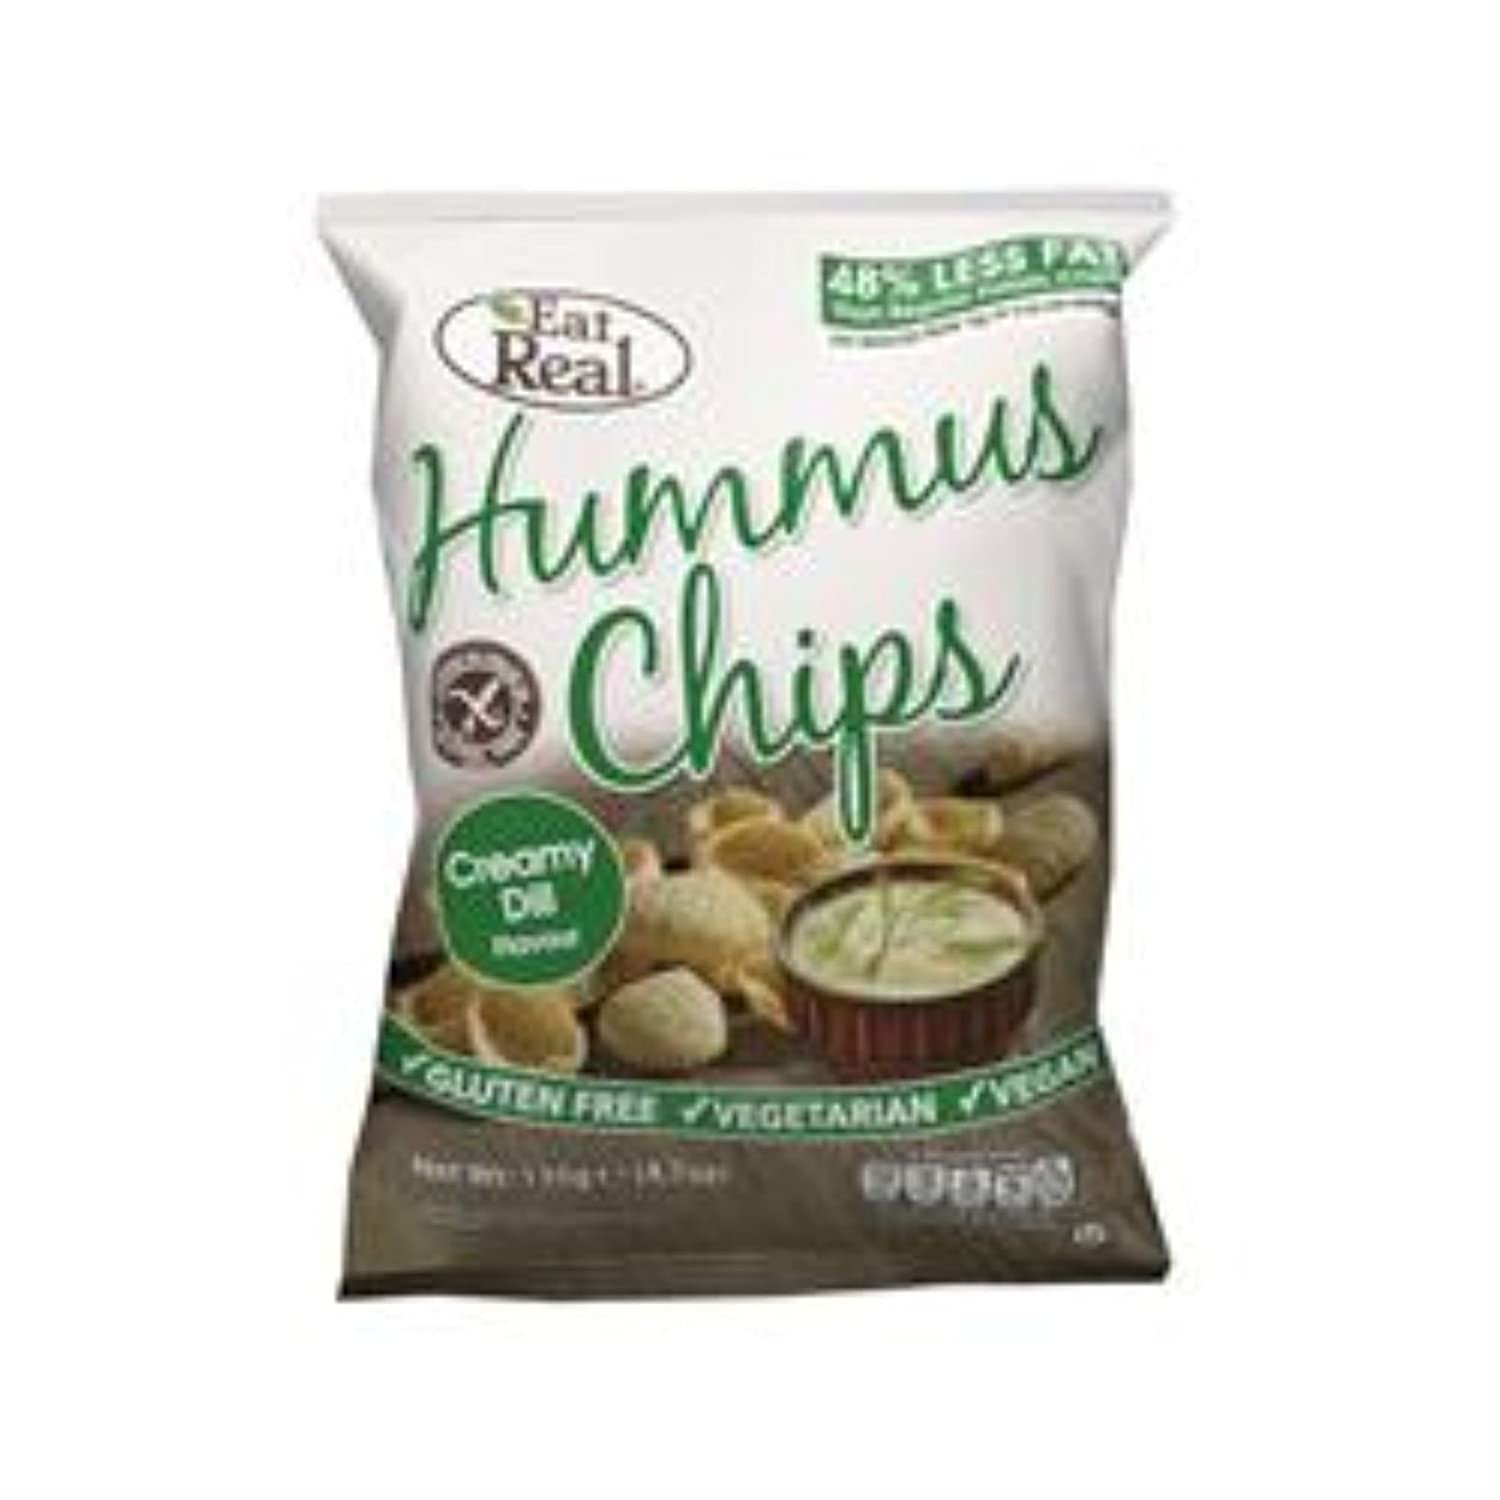 Eat Real - Hummus Chips - Creamy Dill - 135g